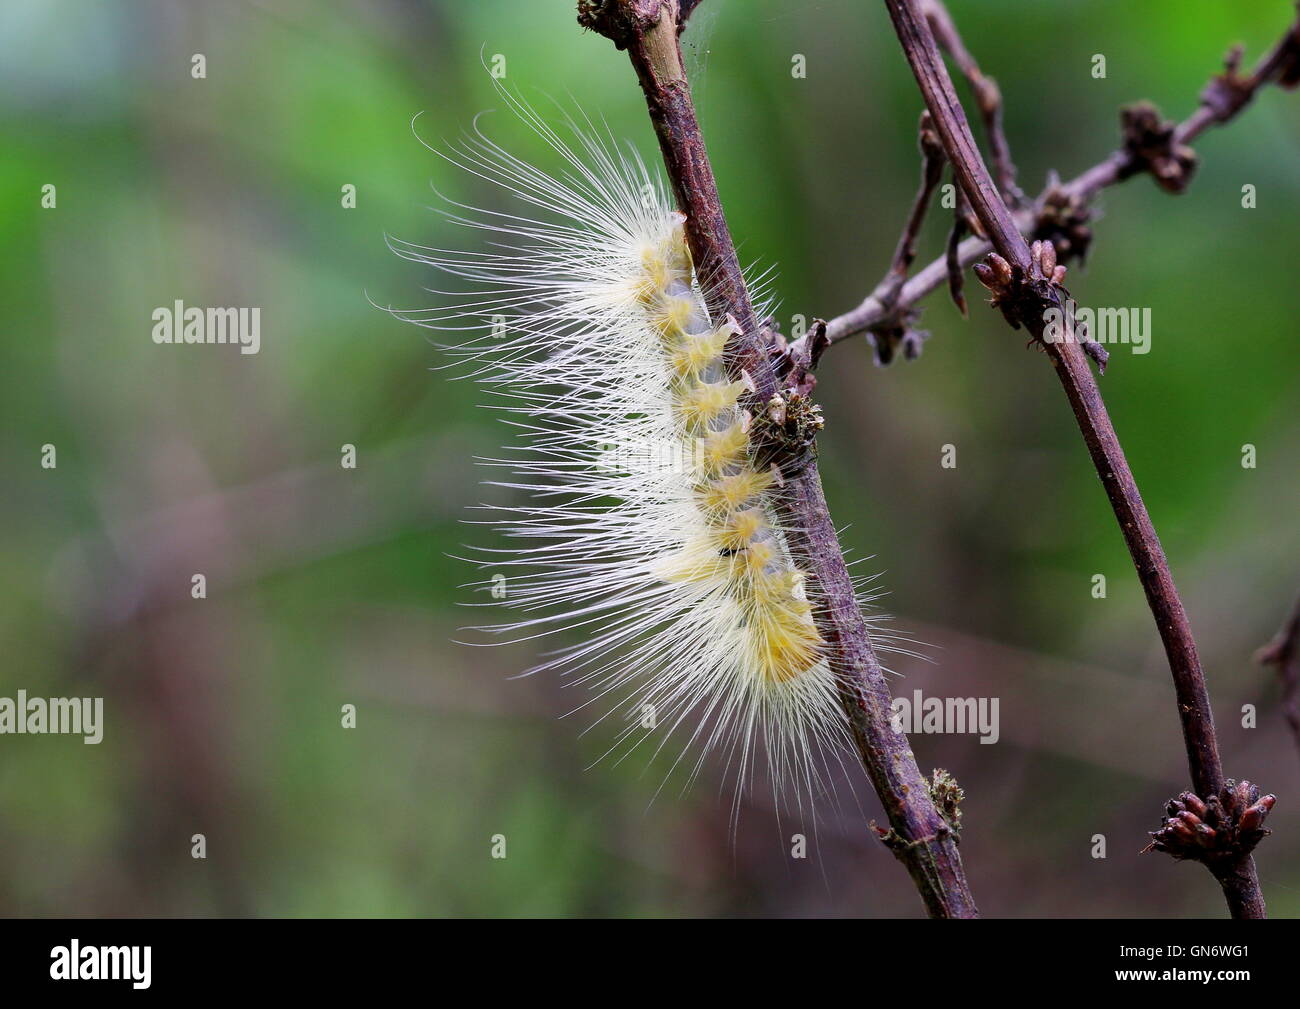 Hairy yellow caterpillar found on a branch in a tropical jungle. Stock Photo